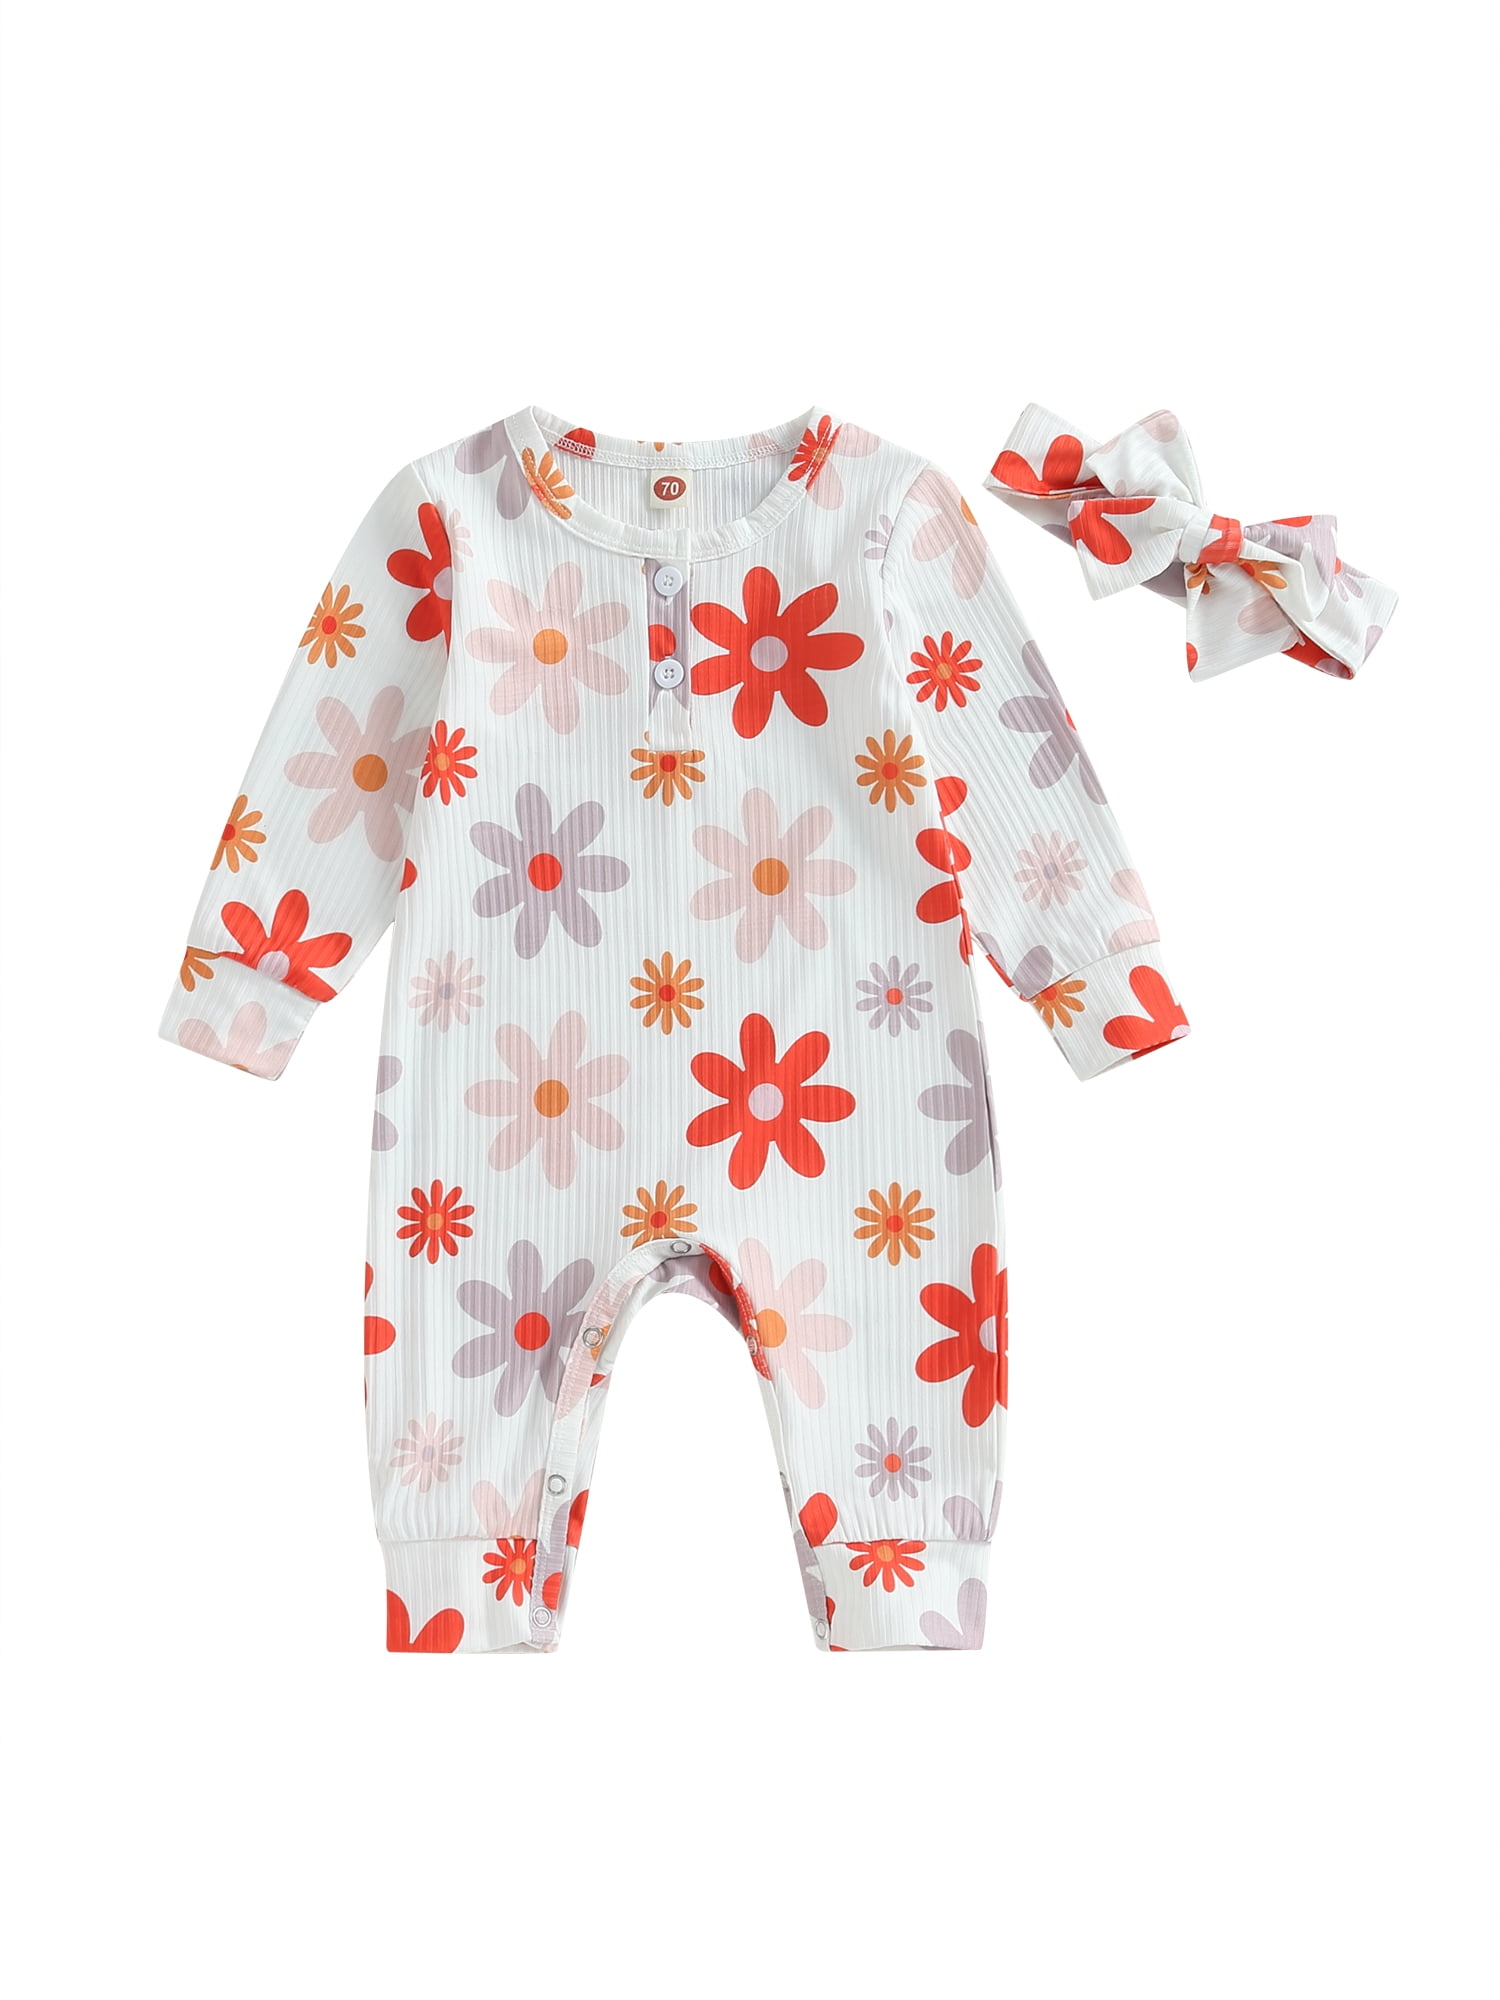 Newborn Baby Girl Clothes Long Sleeve Floral Romper Onesie One Piece ...